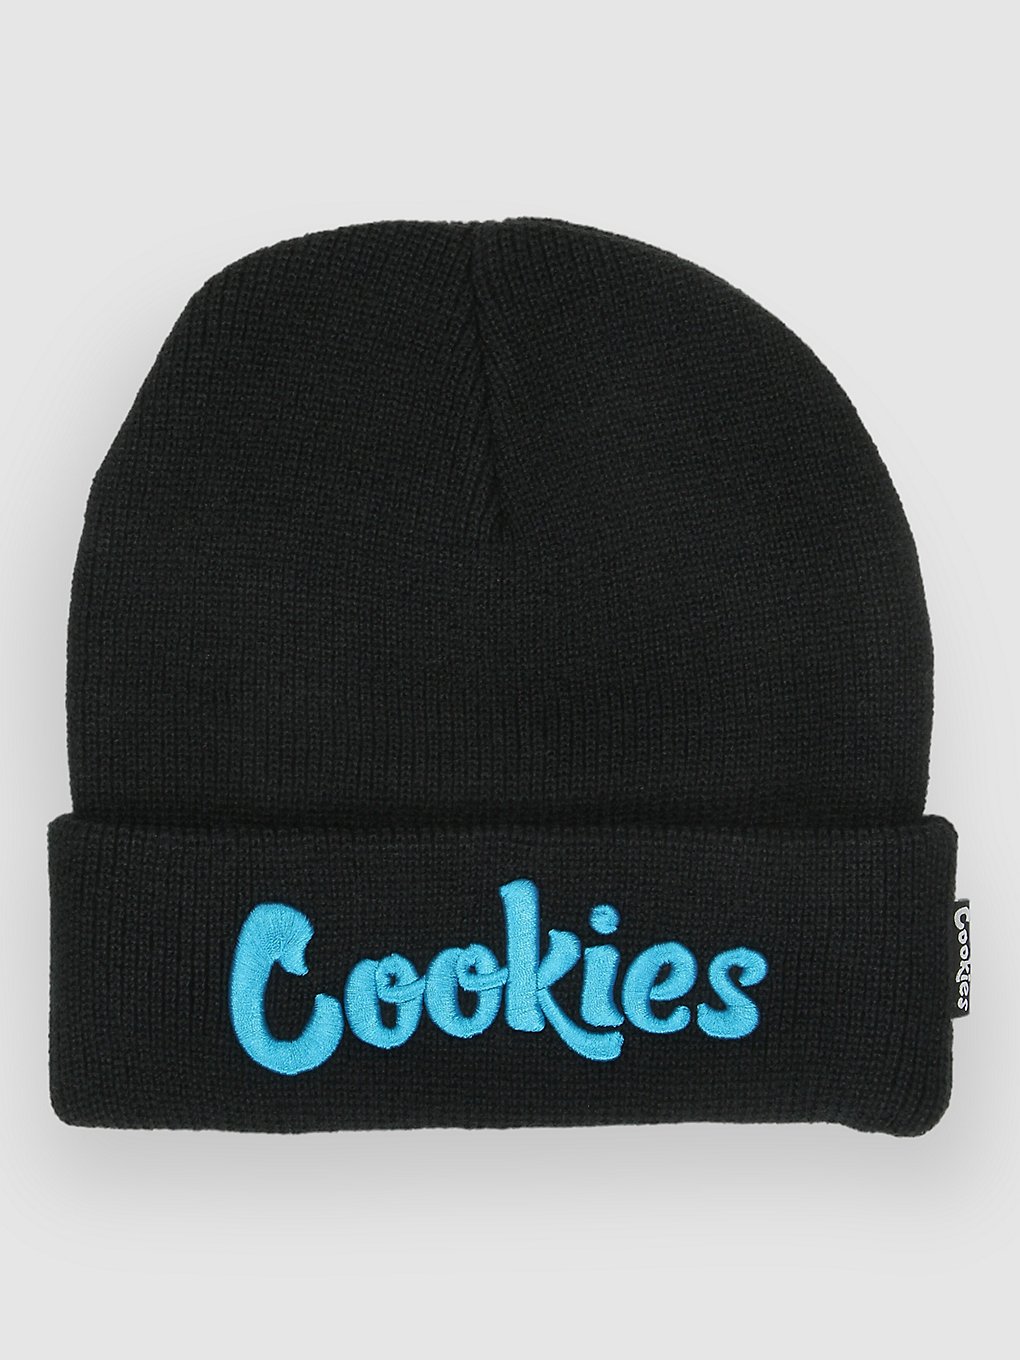 Cookies Original Mint Embroidered Knit Beanie  cookies blue kaufen